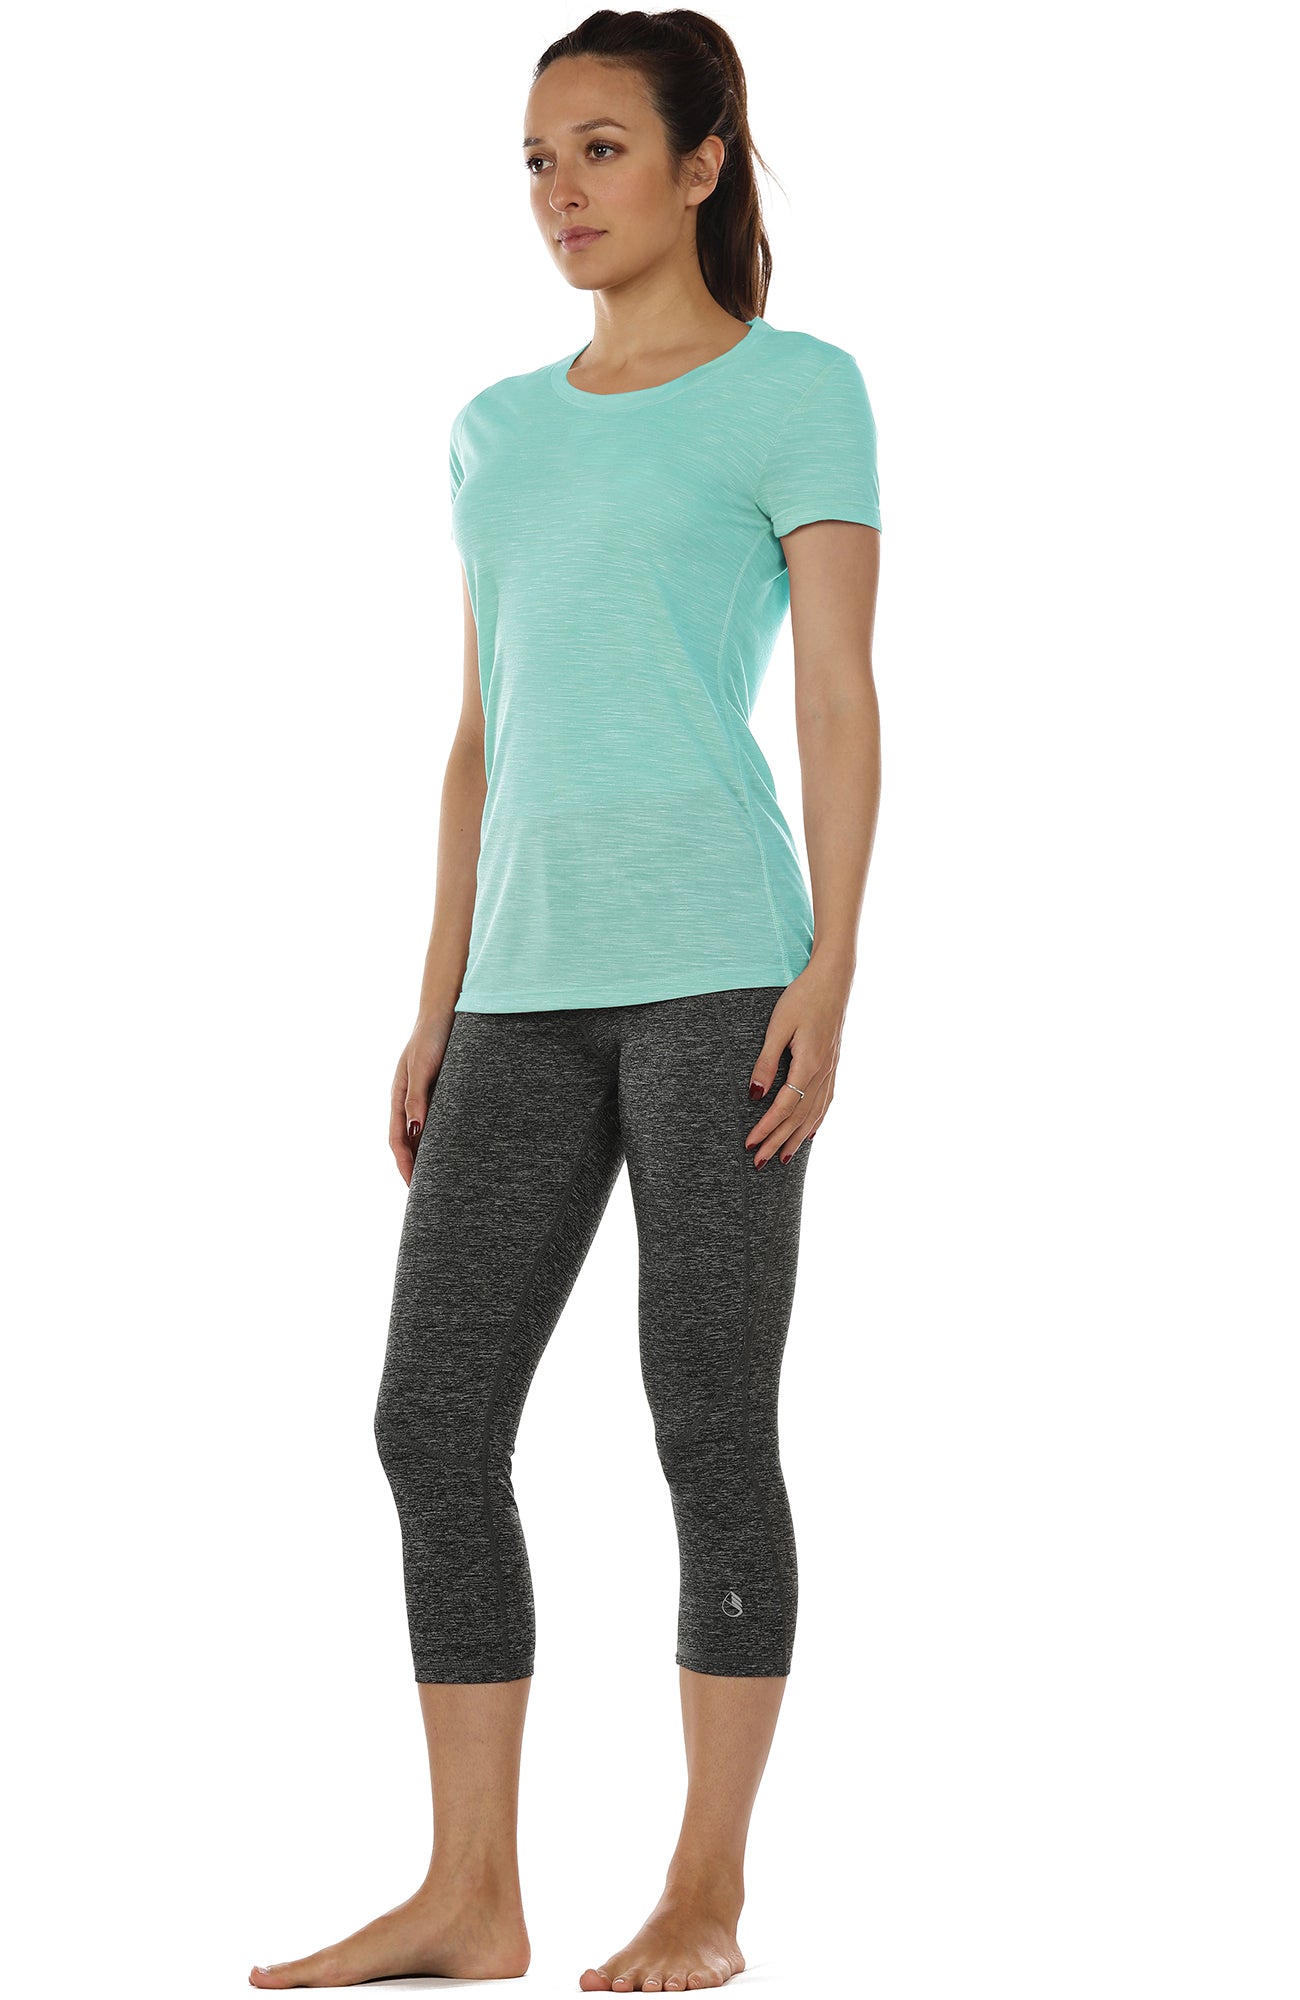 icyzone Workout Shirts for Women - Yoga Tops Gym Clothes Running